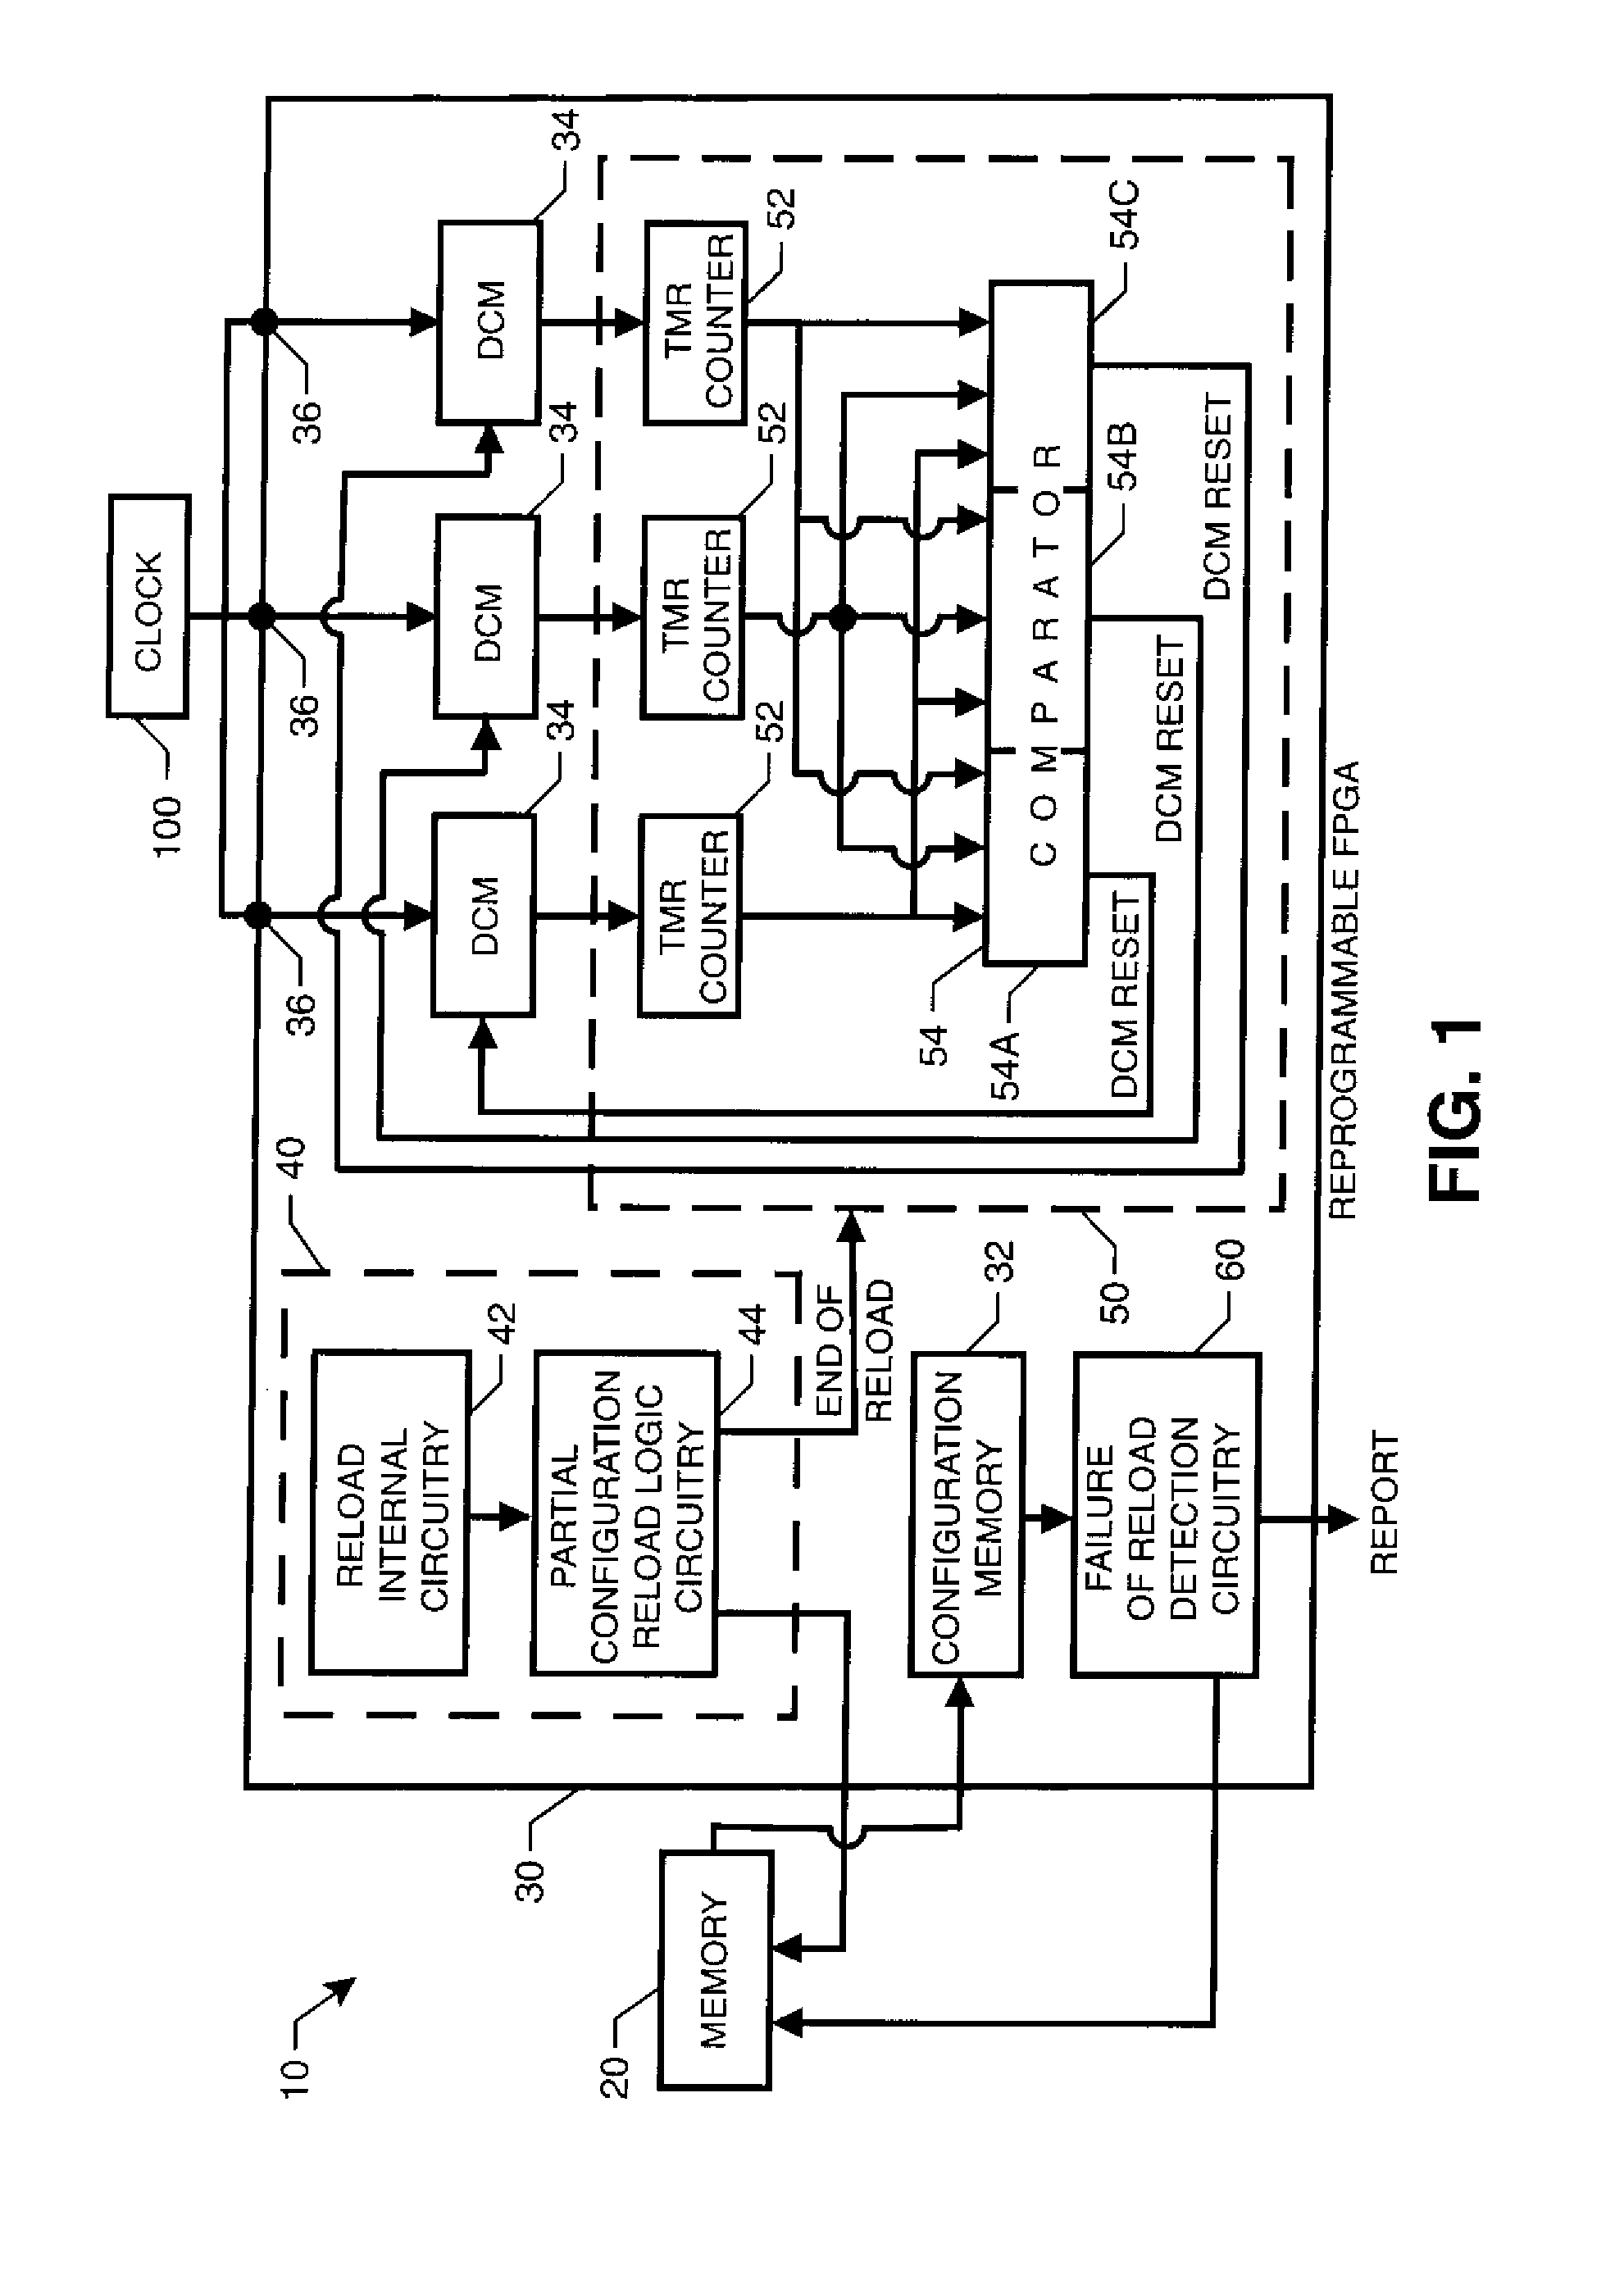 Reprogrammable field programmable gate array with integrated system for mitigating effects of single event upsets